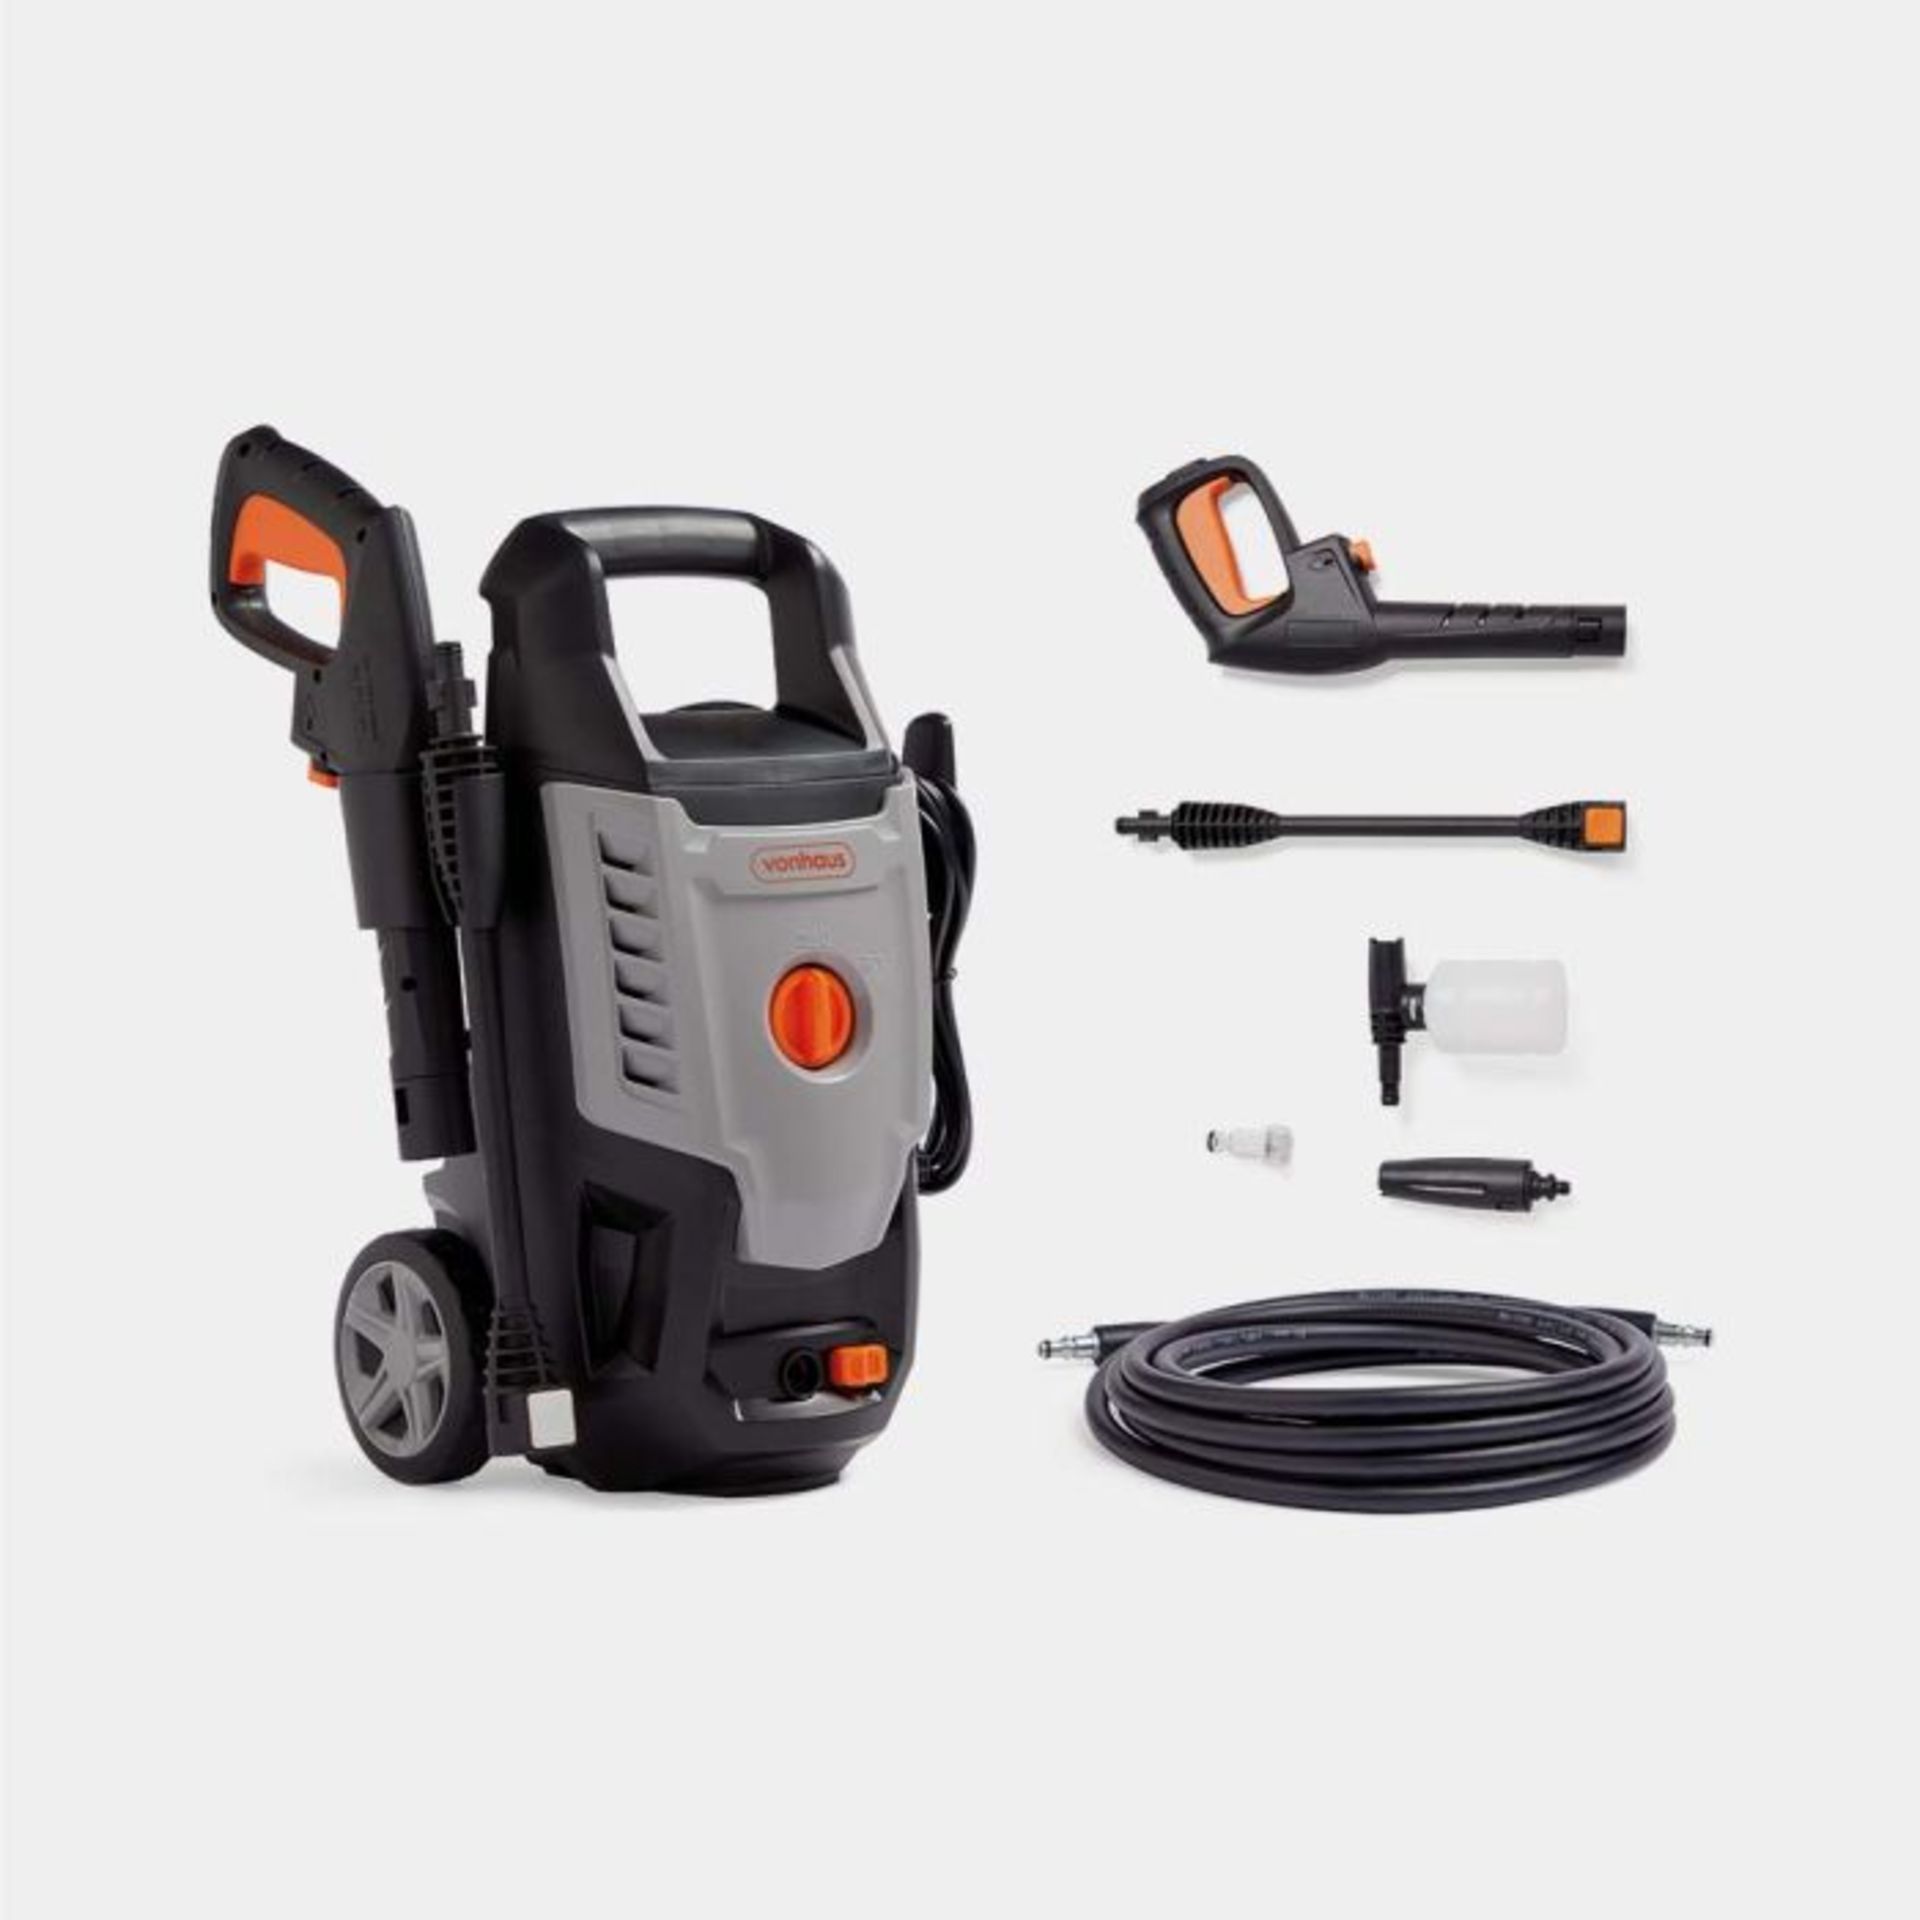 1600W Pressure Washer. - ER51. Featuring a wobble pump for self-priming, the washer is powered by